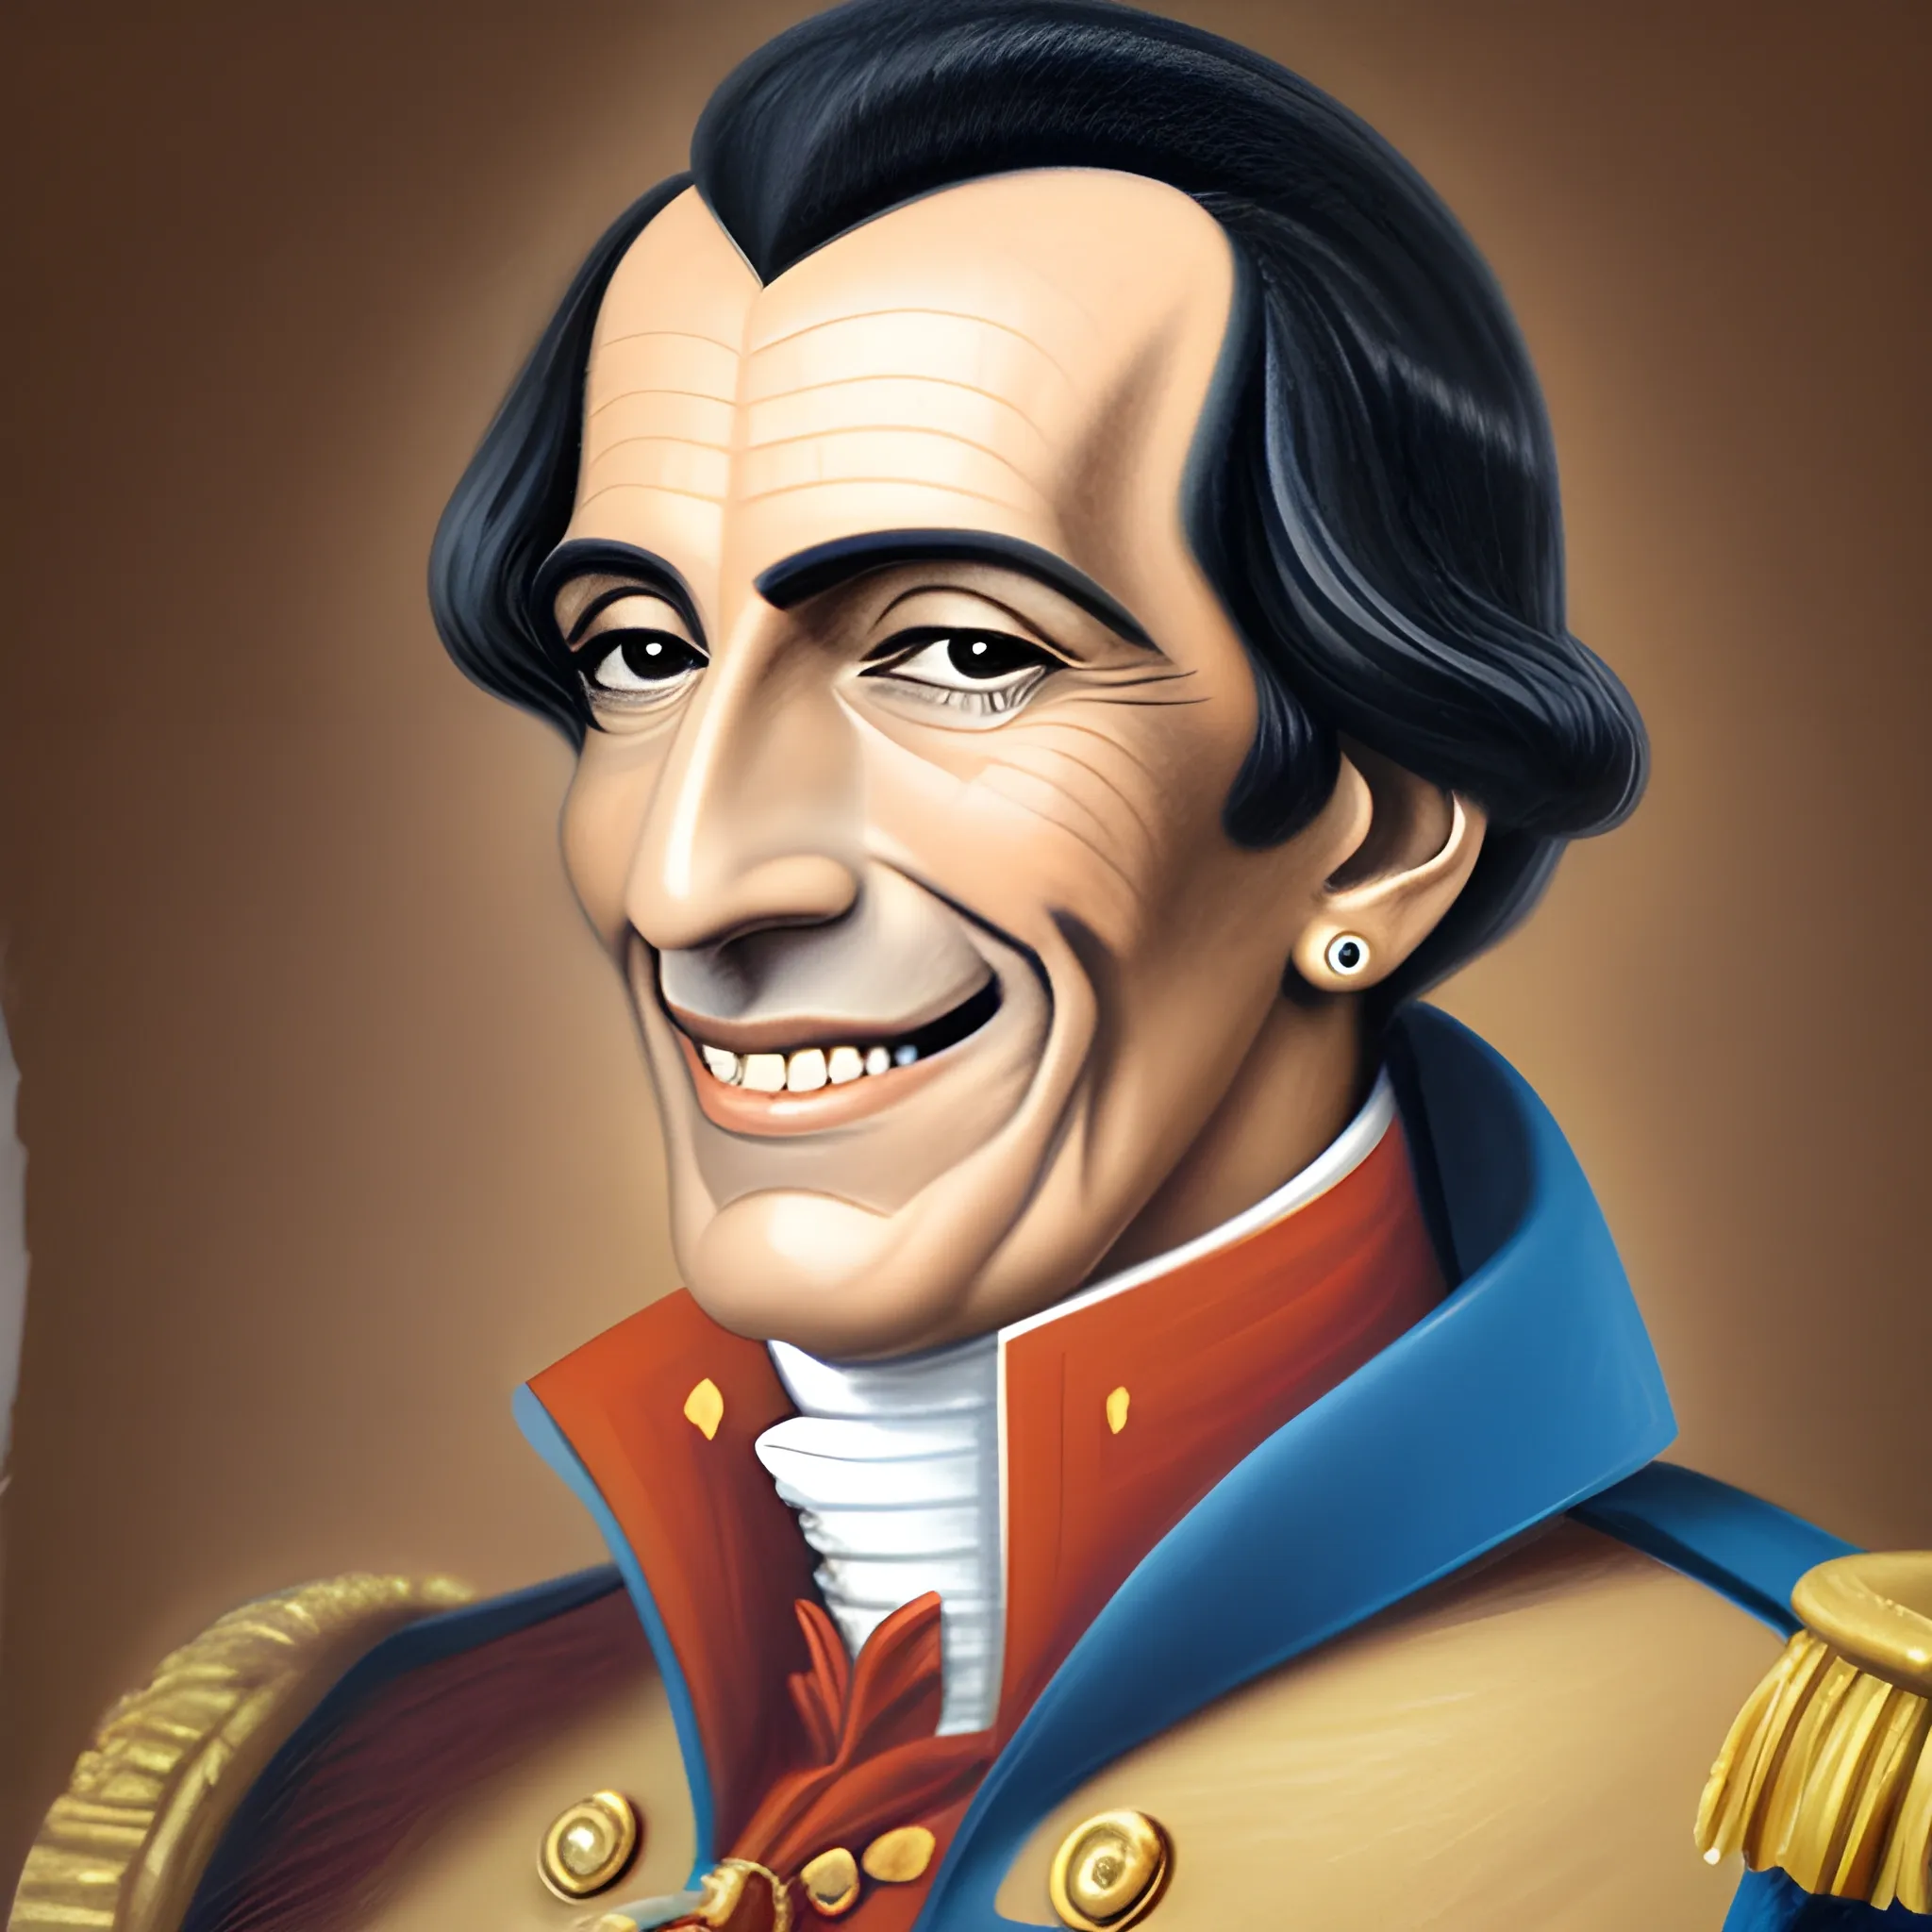 Simon Bolivar smiling at his bithday party, Oil Painting, Pencil Sketch, 3D